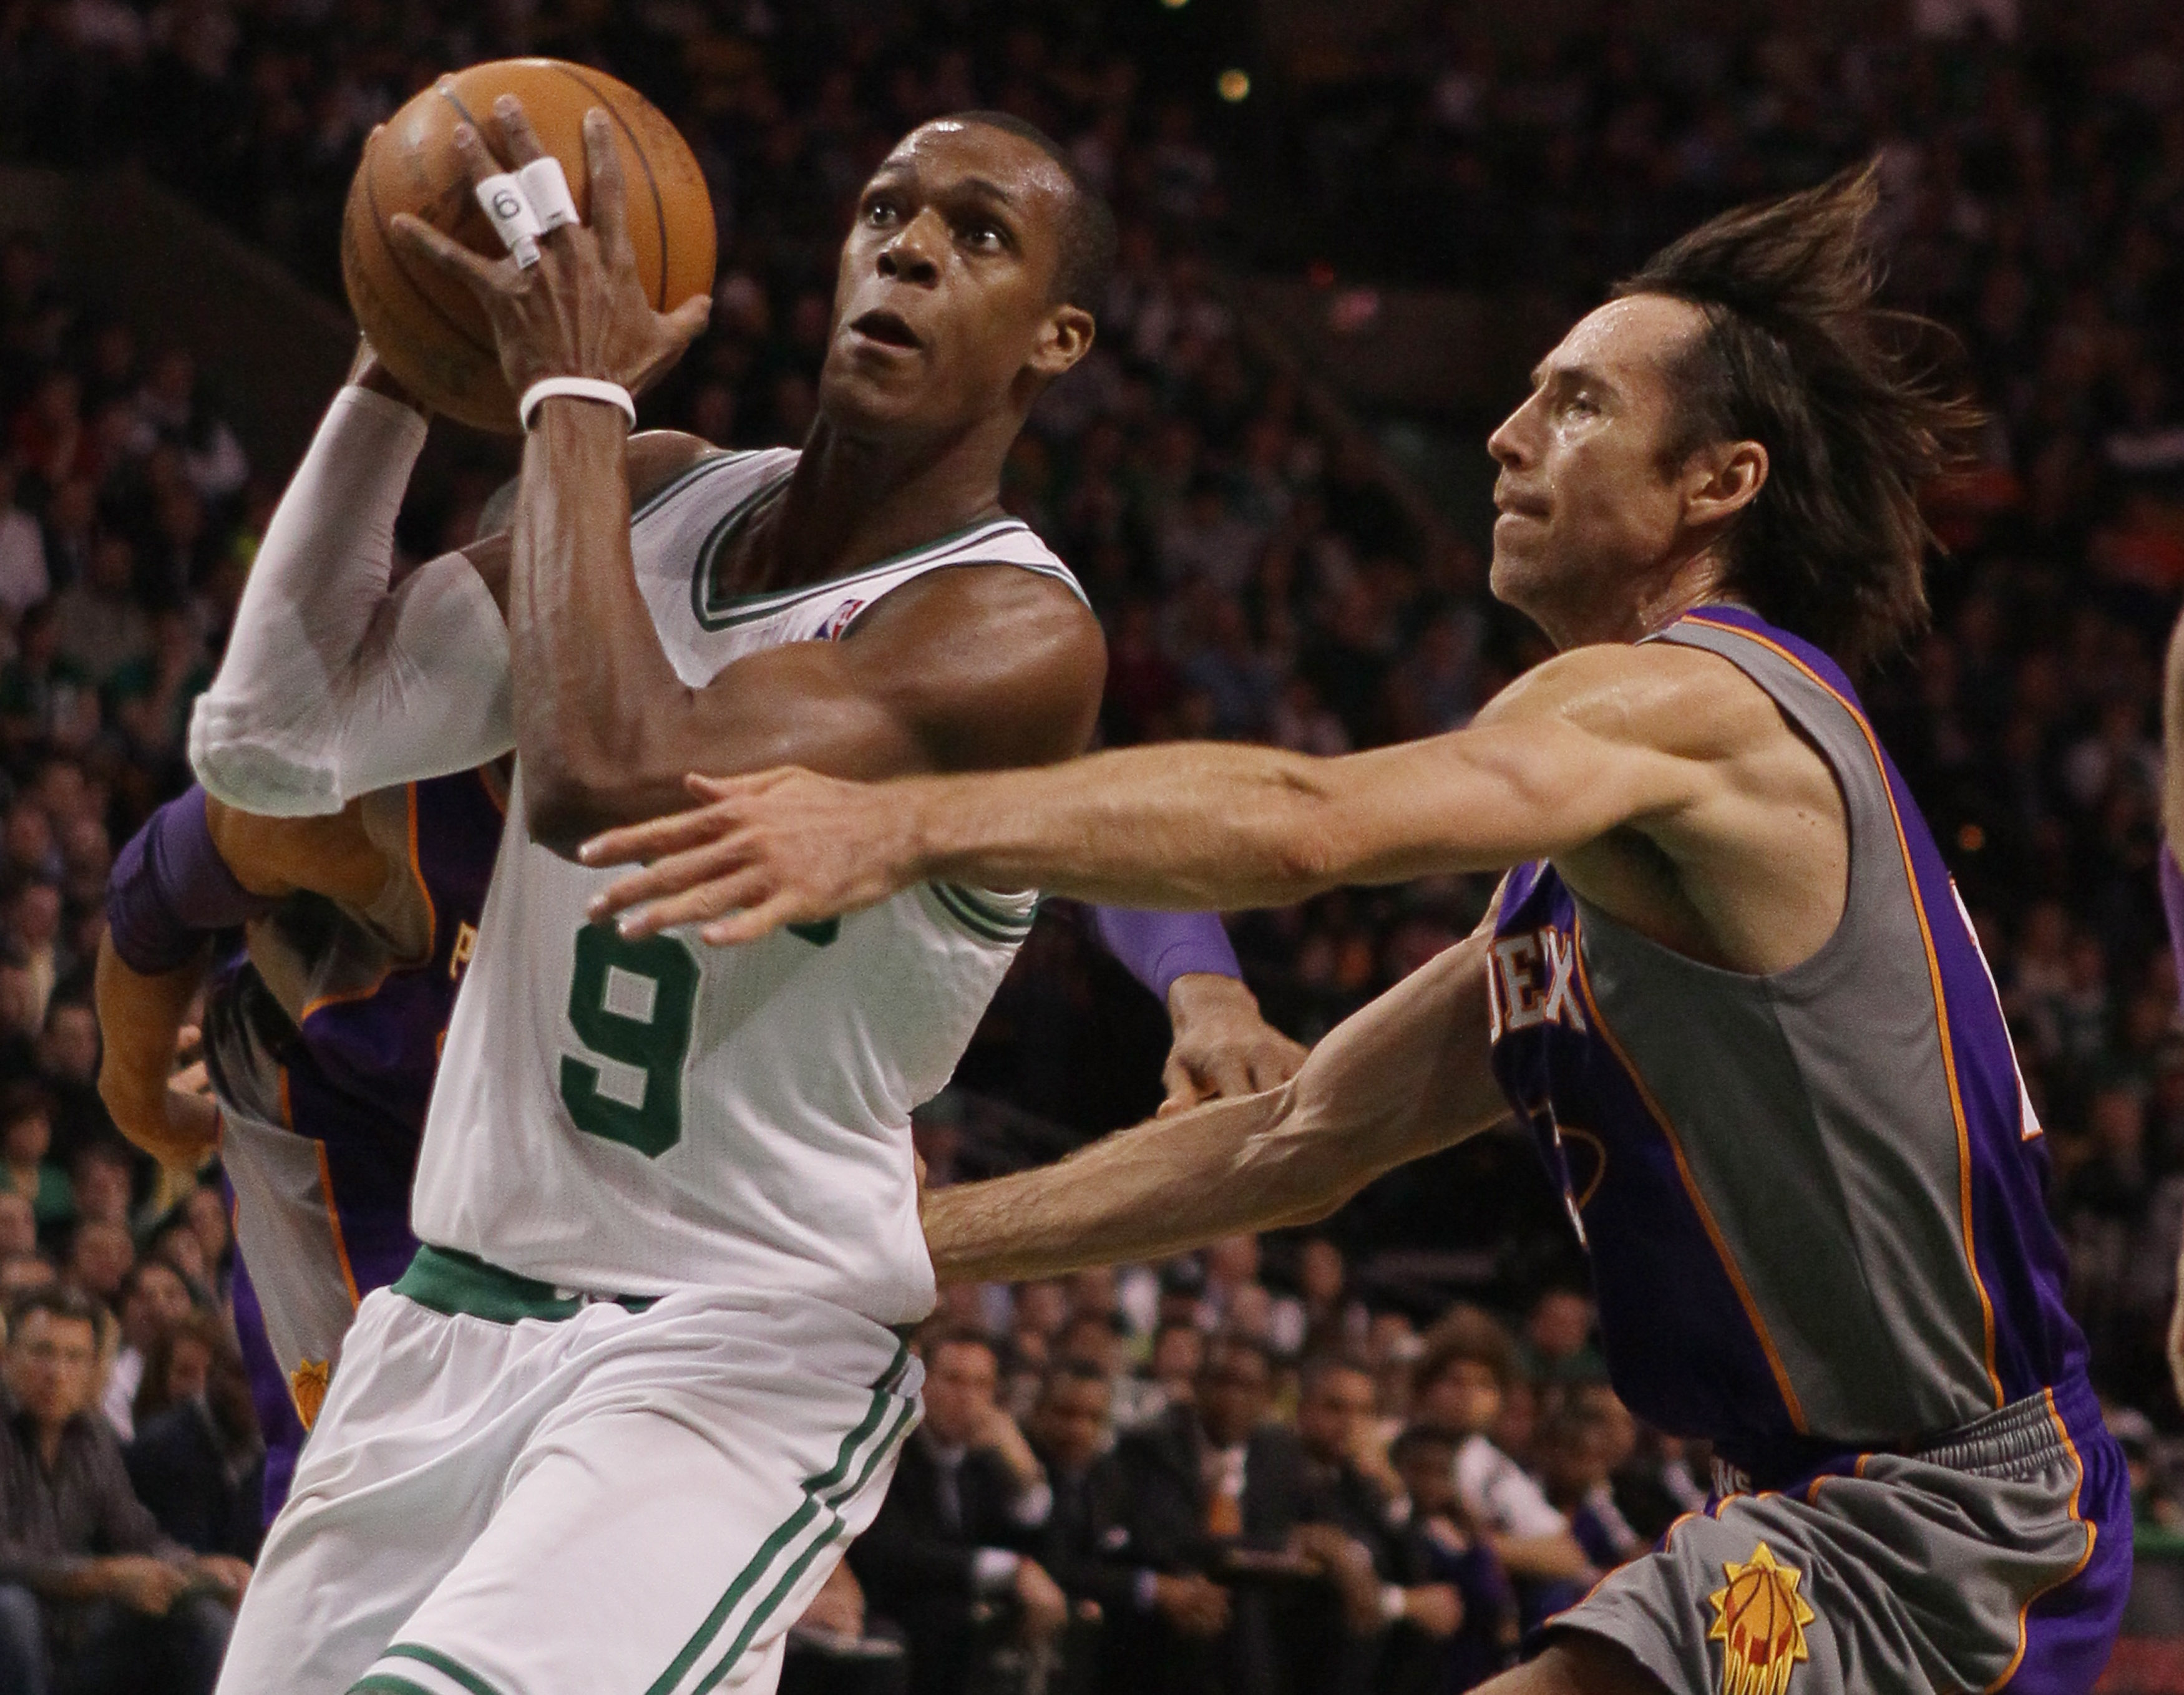 BOSTON, MA - MARCH 02:  Rajon Rondo #9 of the Boston Celtics heads for the net as Steve Nash #13 of the Phoenix Suns defends on March 2, 2011 at the TD Garden in Boston, Massachusetts.  NOTE TO USER: User expressly acknowledges and agrees that, by downloa